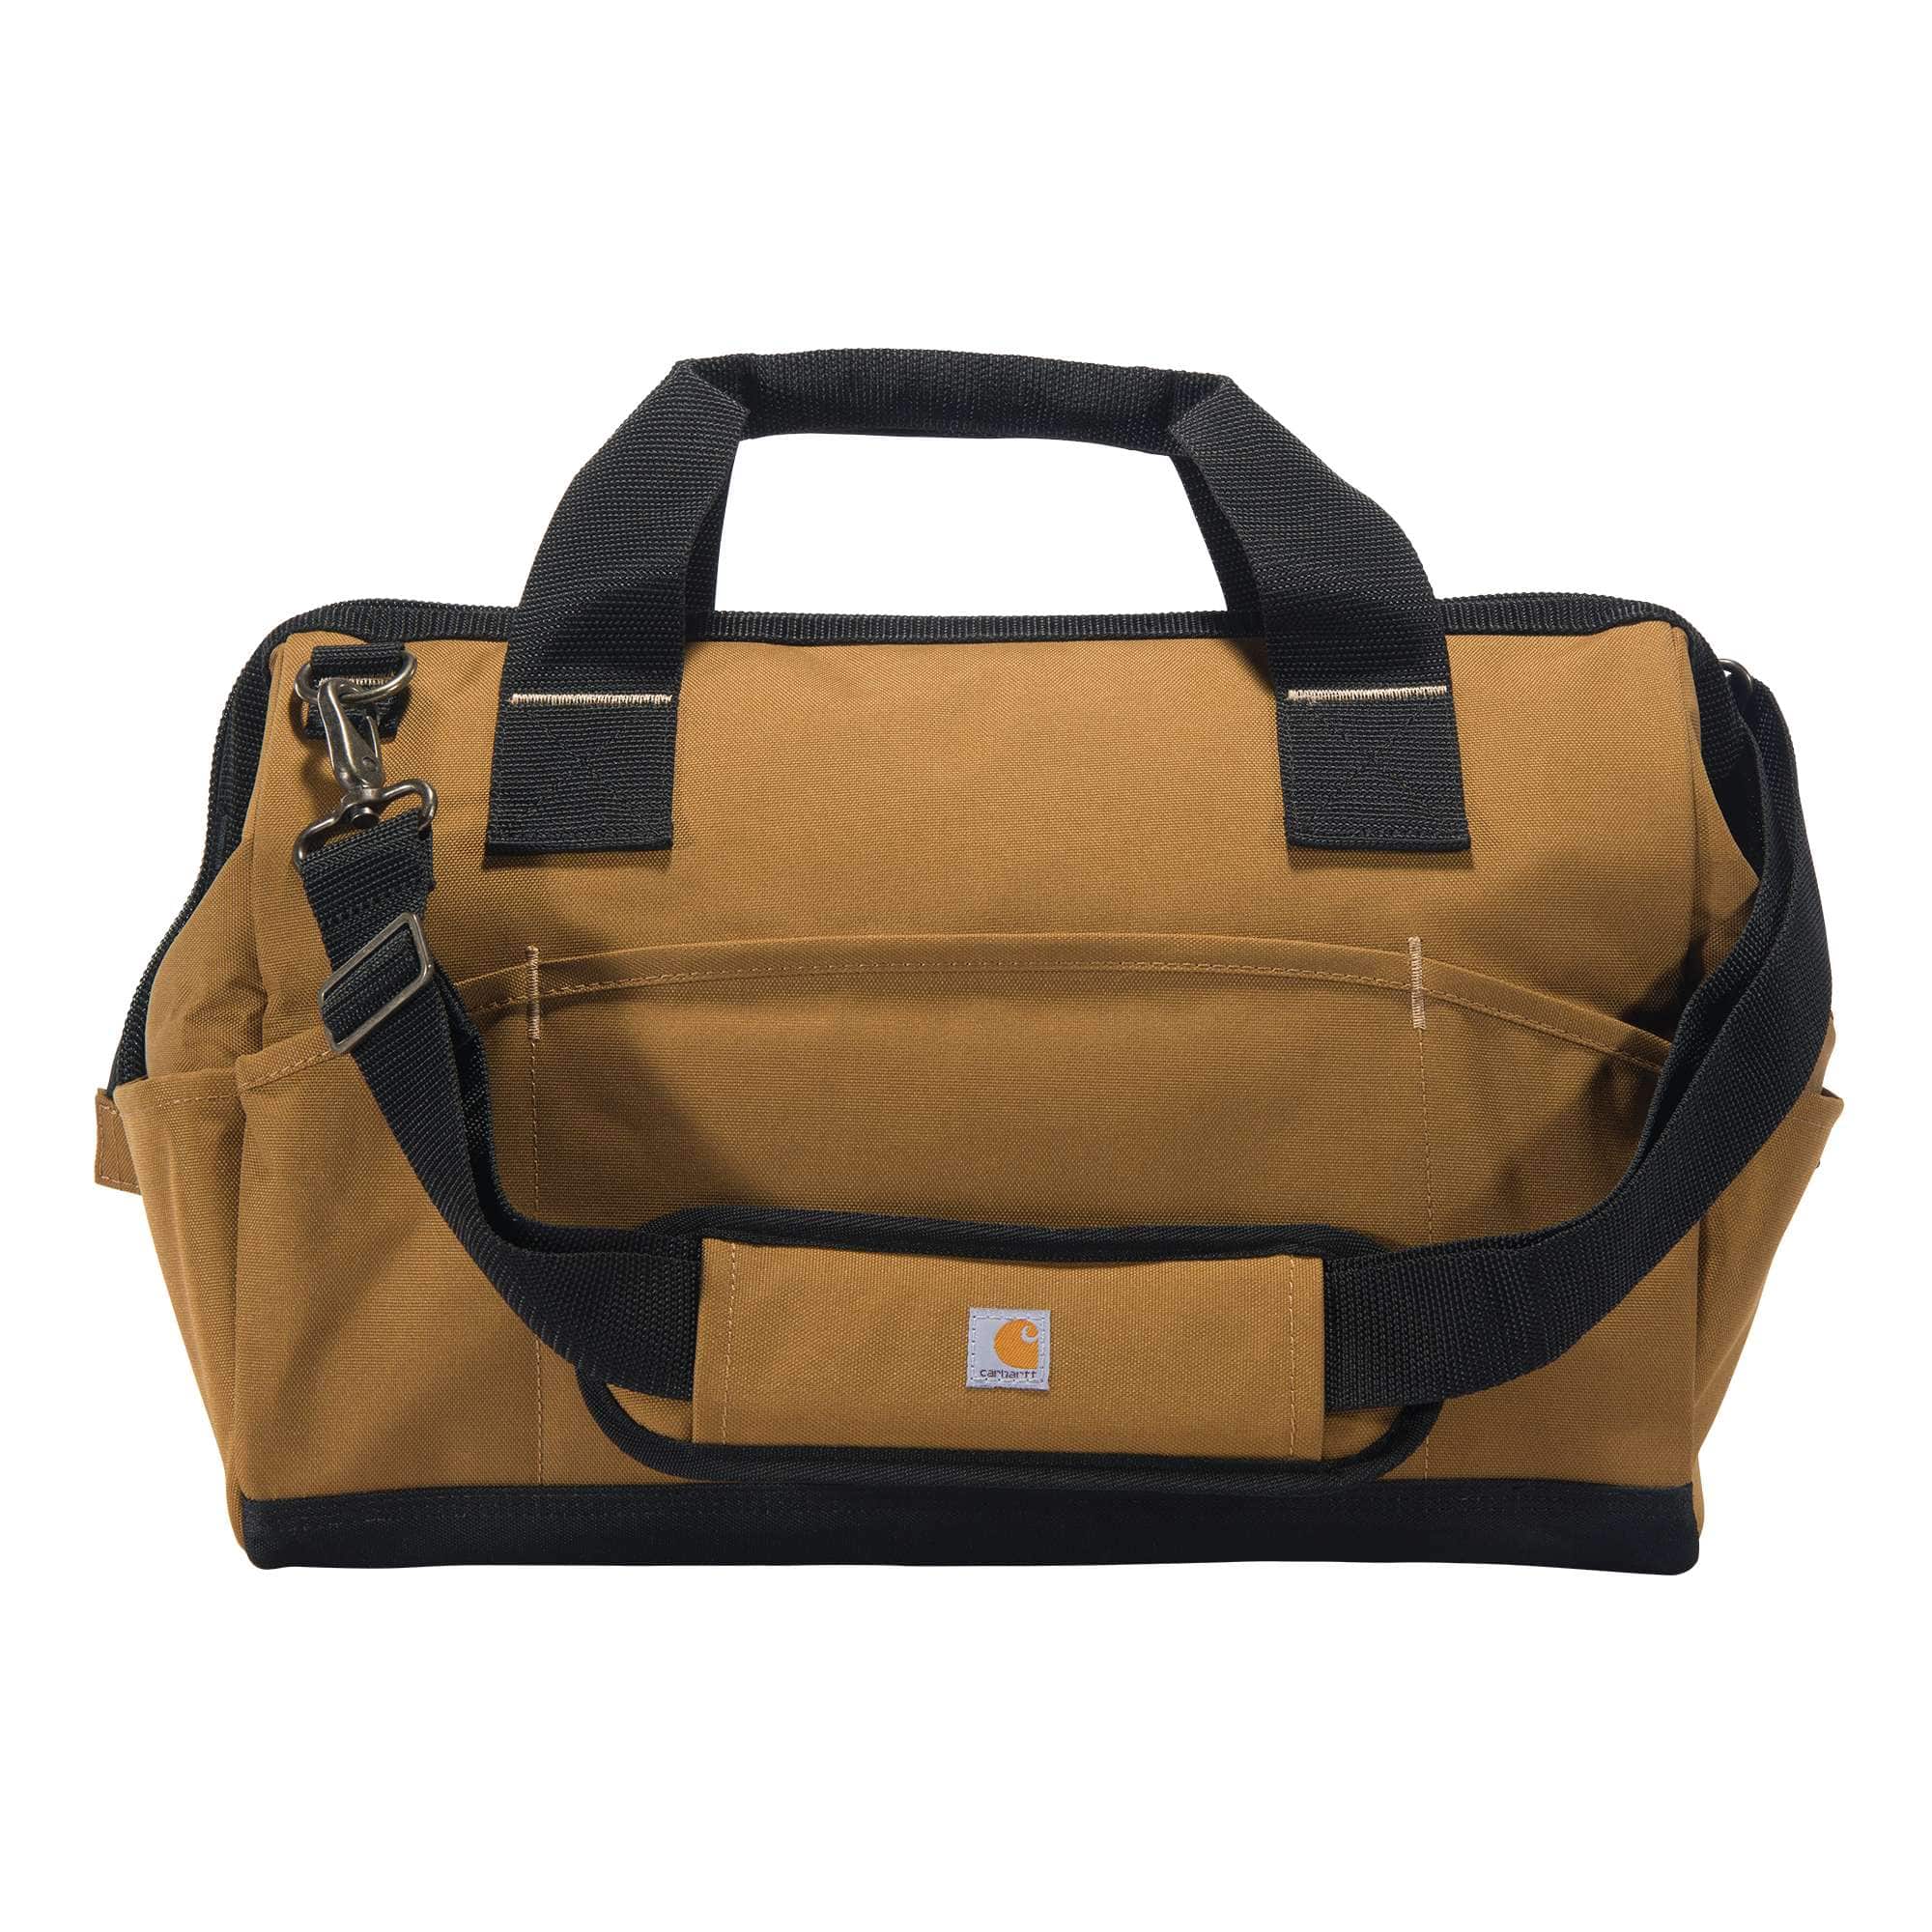 16-Inch 17 Pocket Midweight Tool Bag